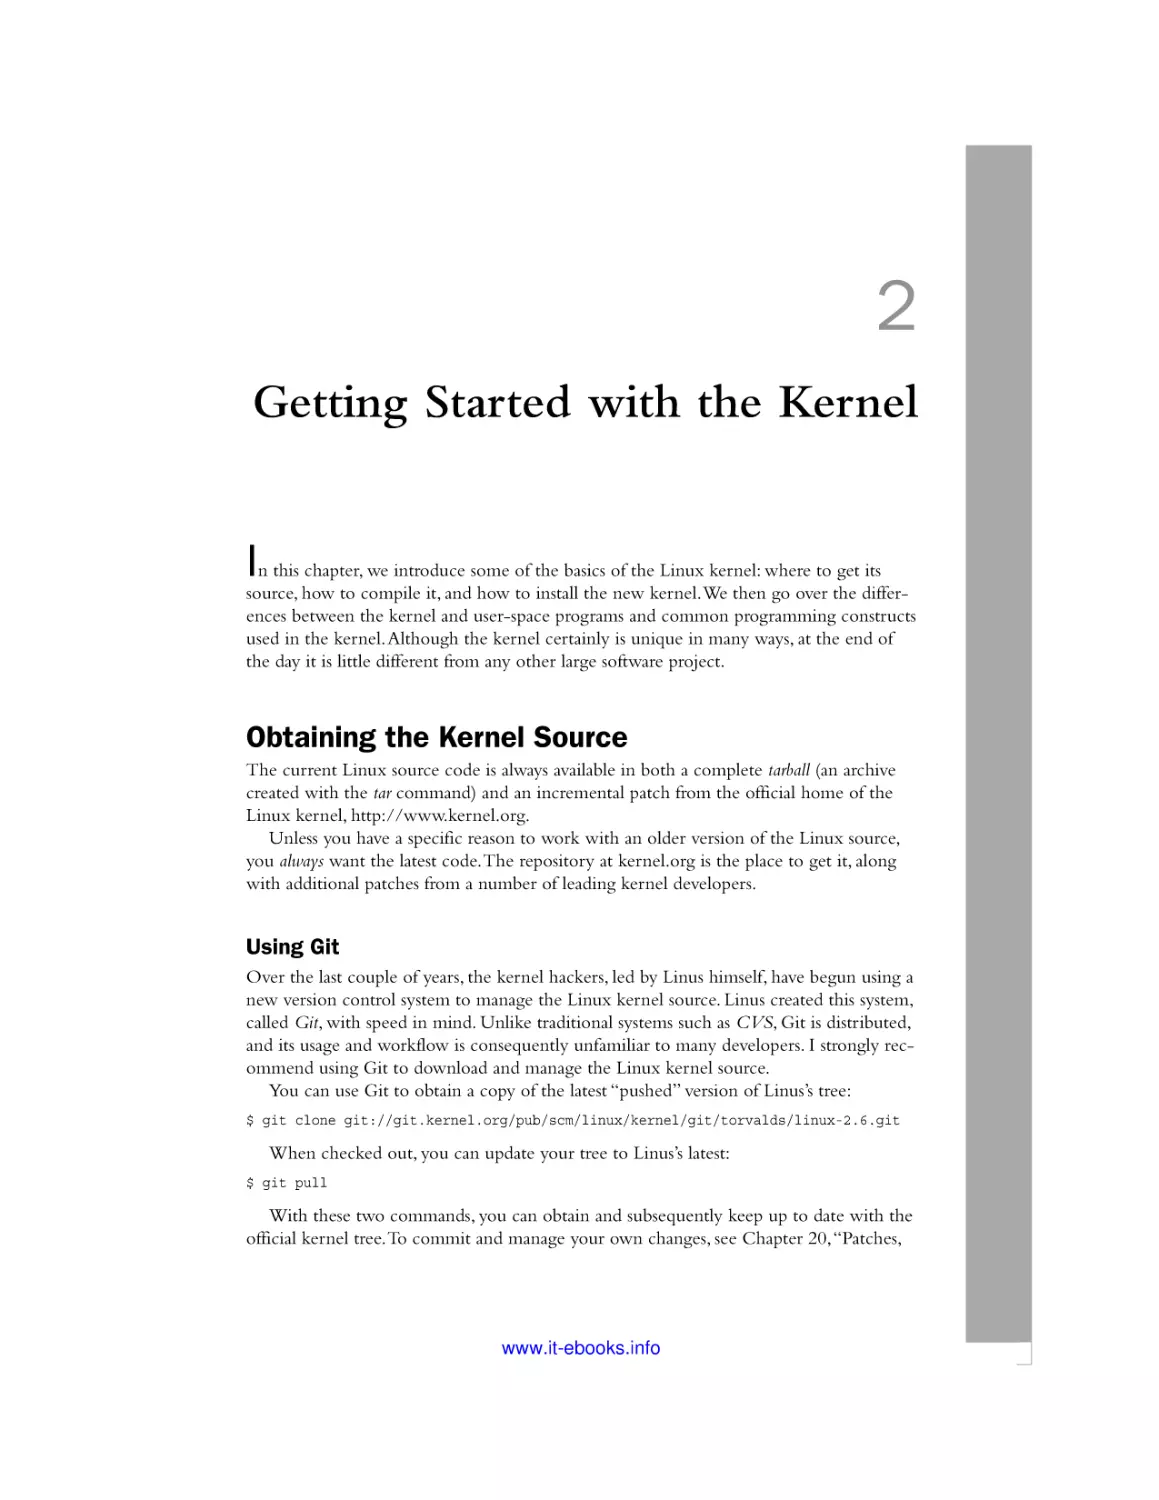 2 Getting Started with the Kernel
Obtaining the Kernel Source
Using Git